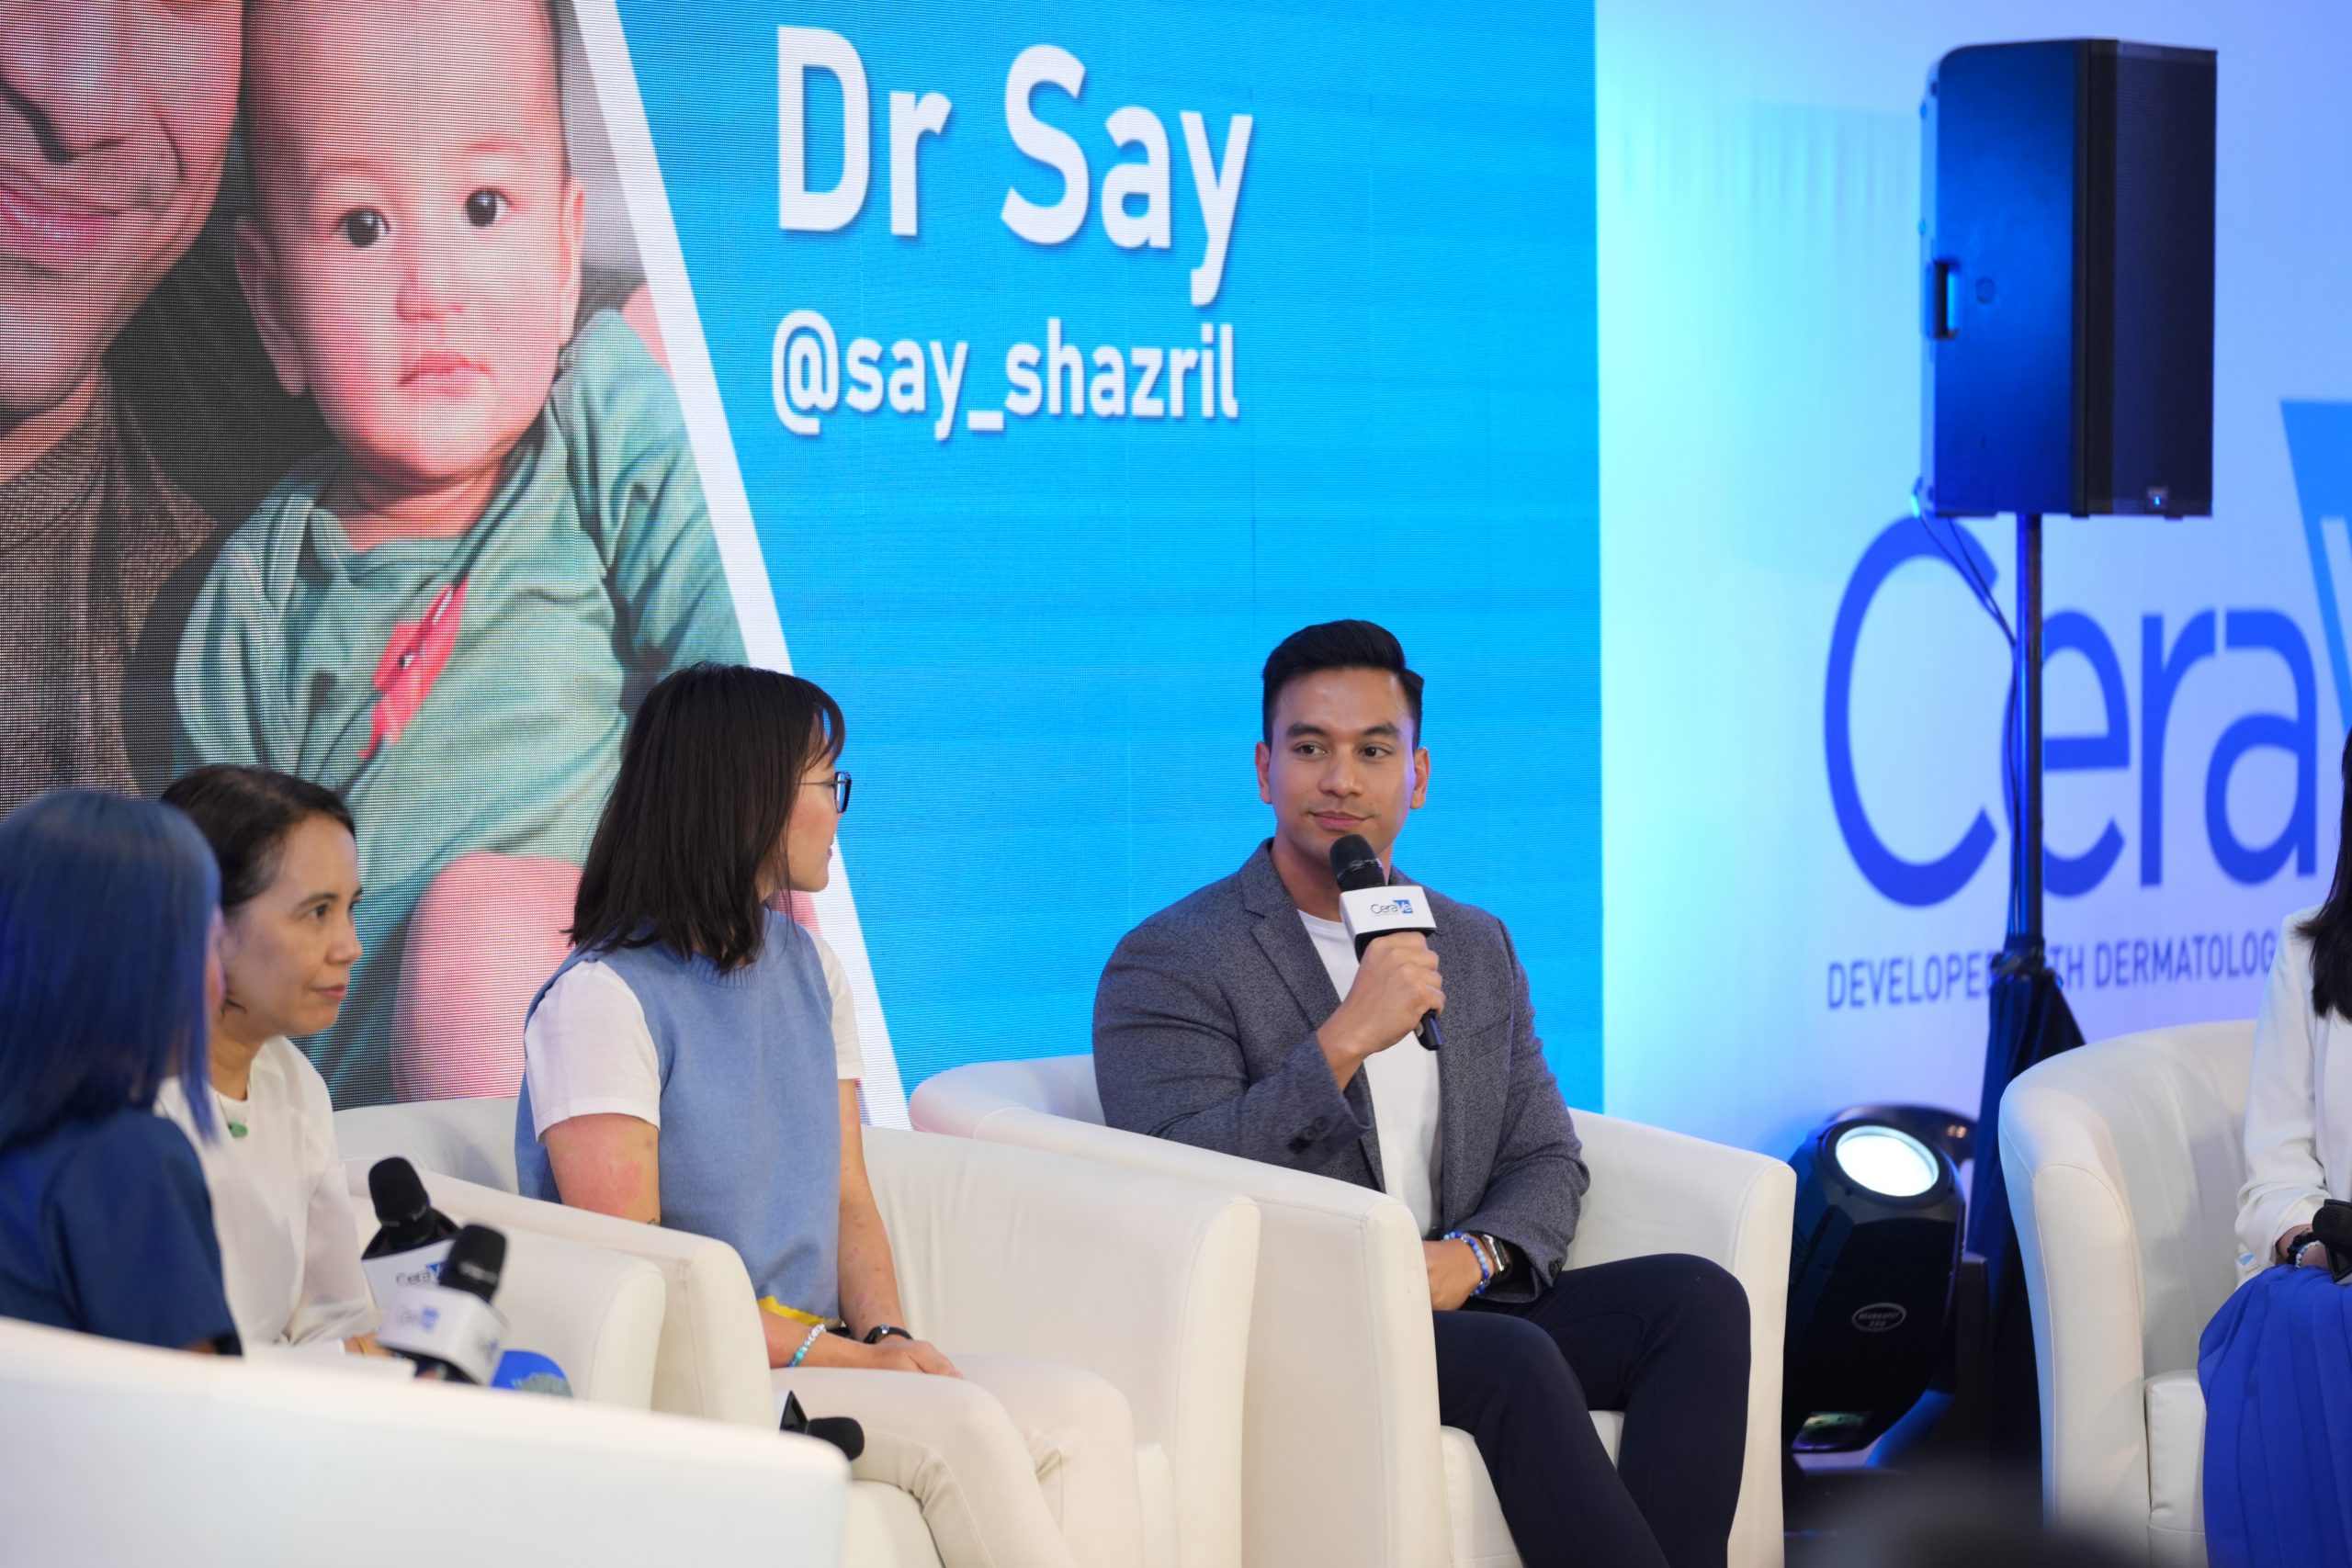 Dr. Shazril sharing the difficulties about raising two babies with eczema and how products like CeraVe have helped improve the quality of life for his family.